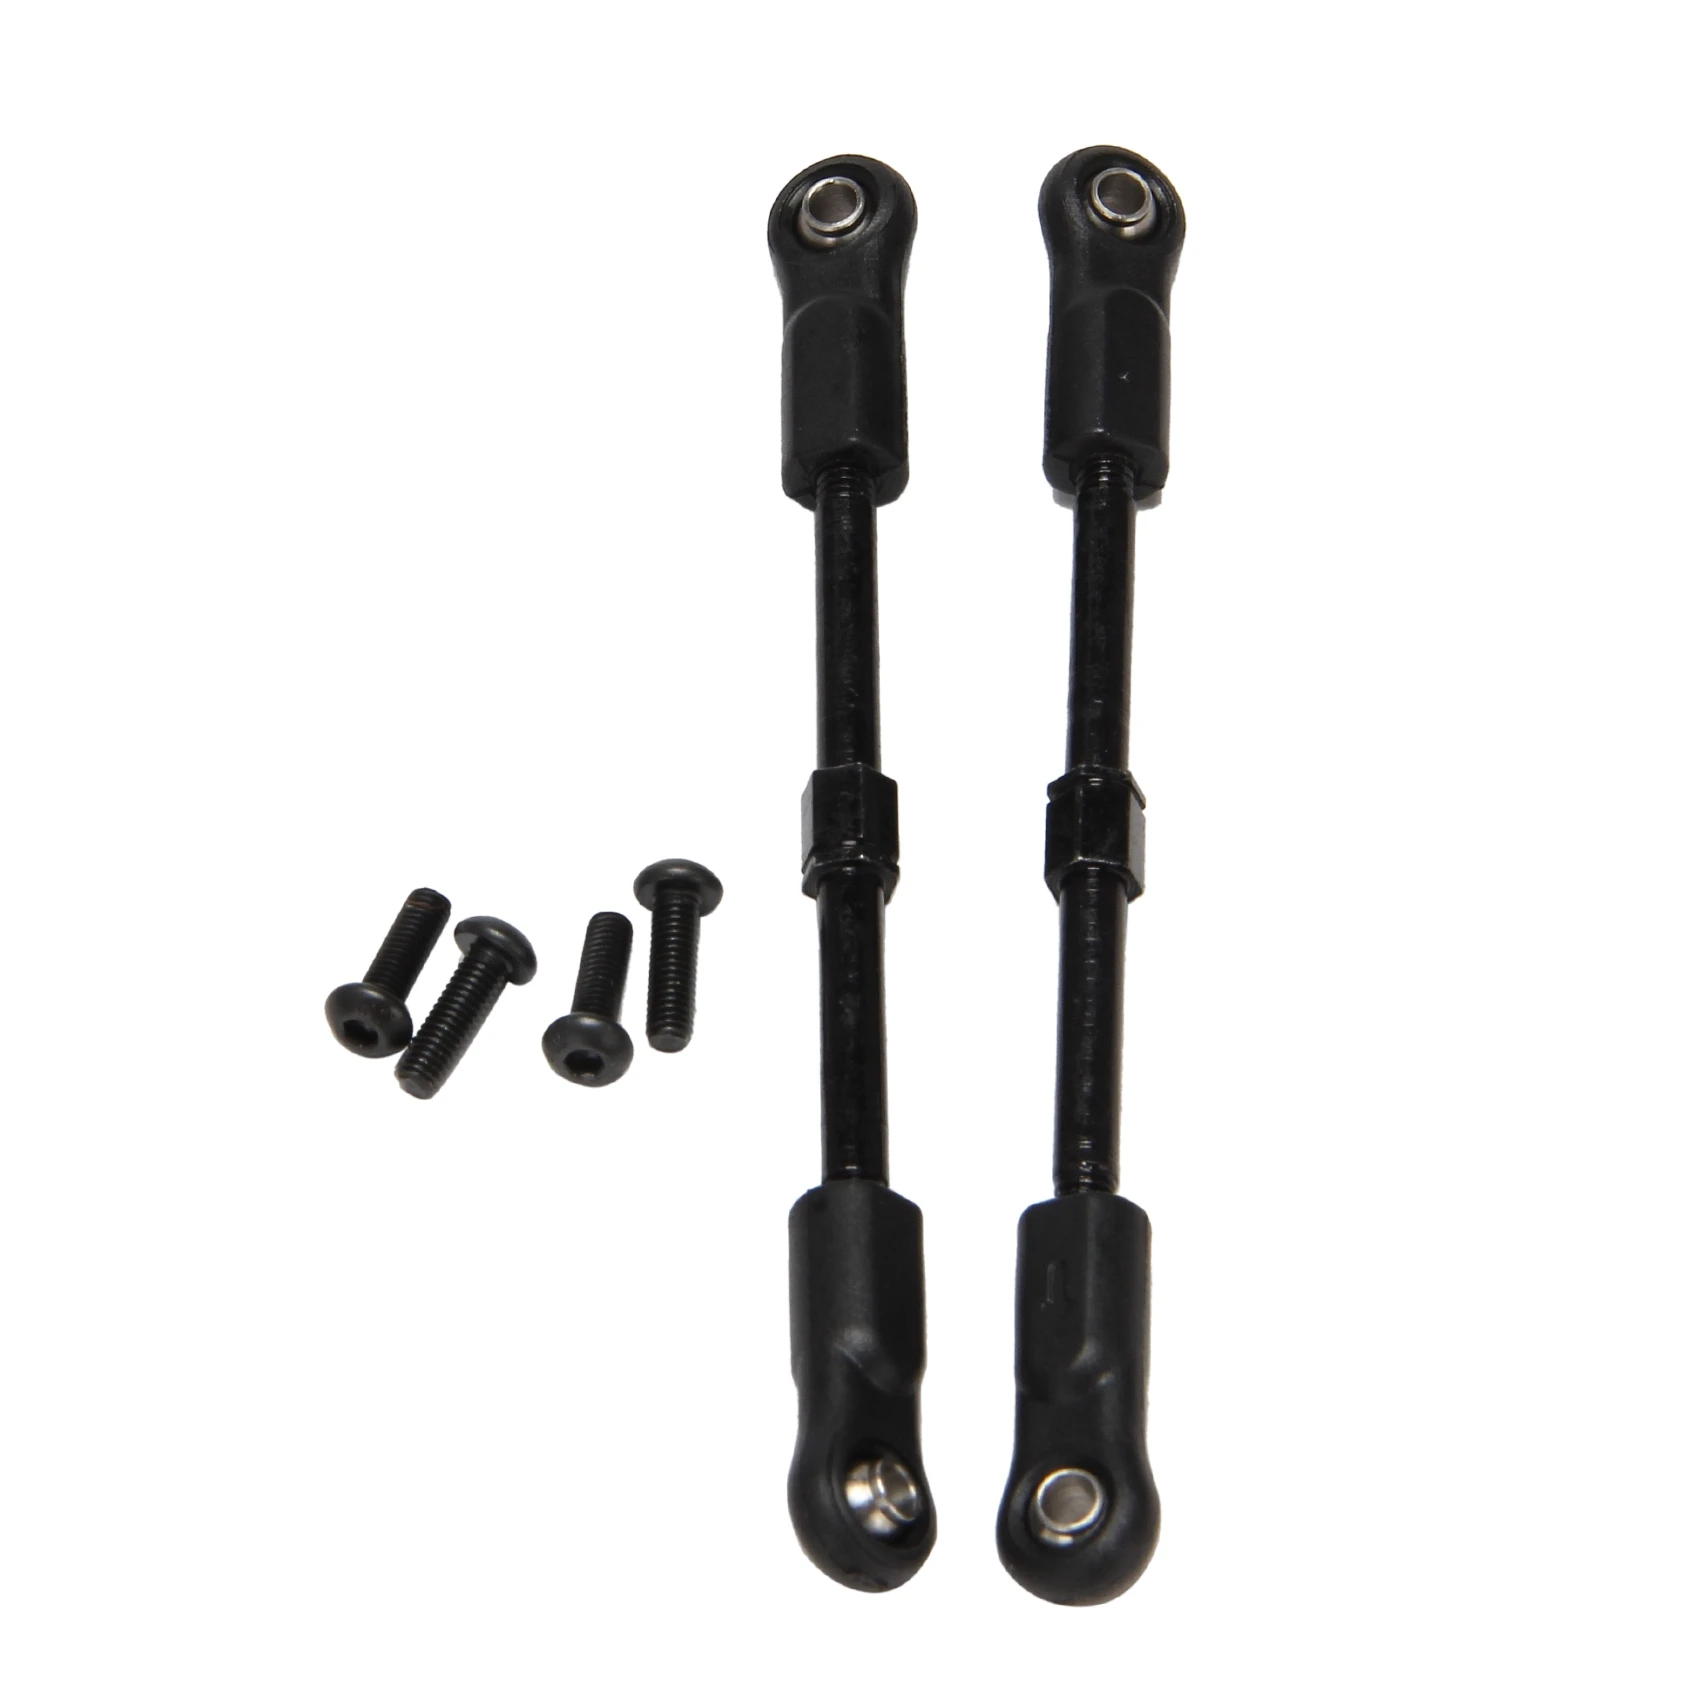 

2PCS Direction Link Pull Rod EA1018 for JLB Racing CHEETAH 1/10 Brushless RC Car Parts Accessories